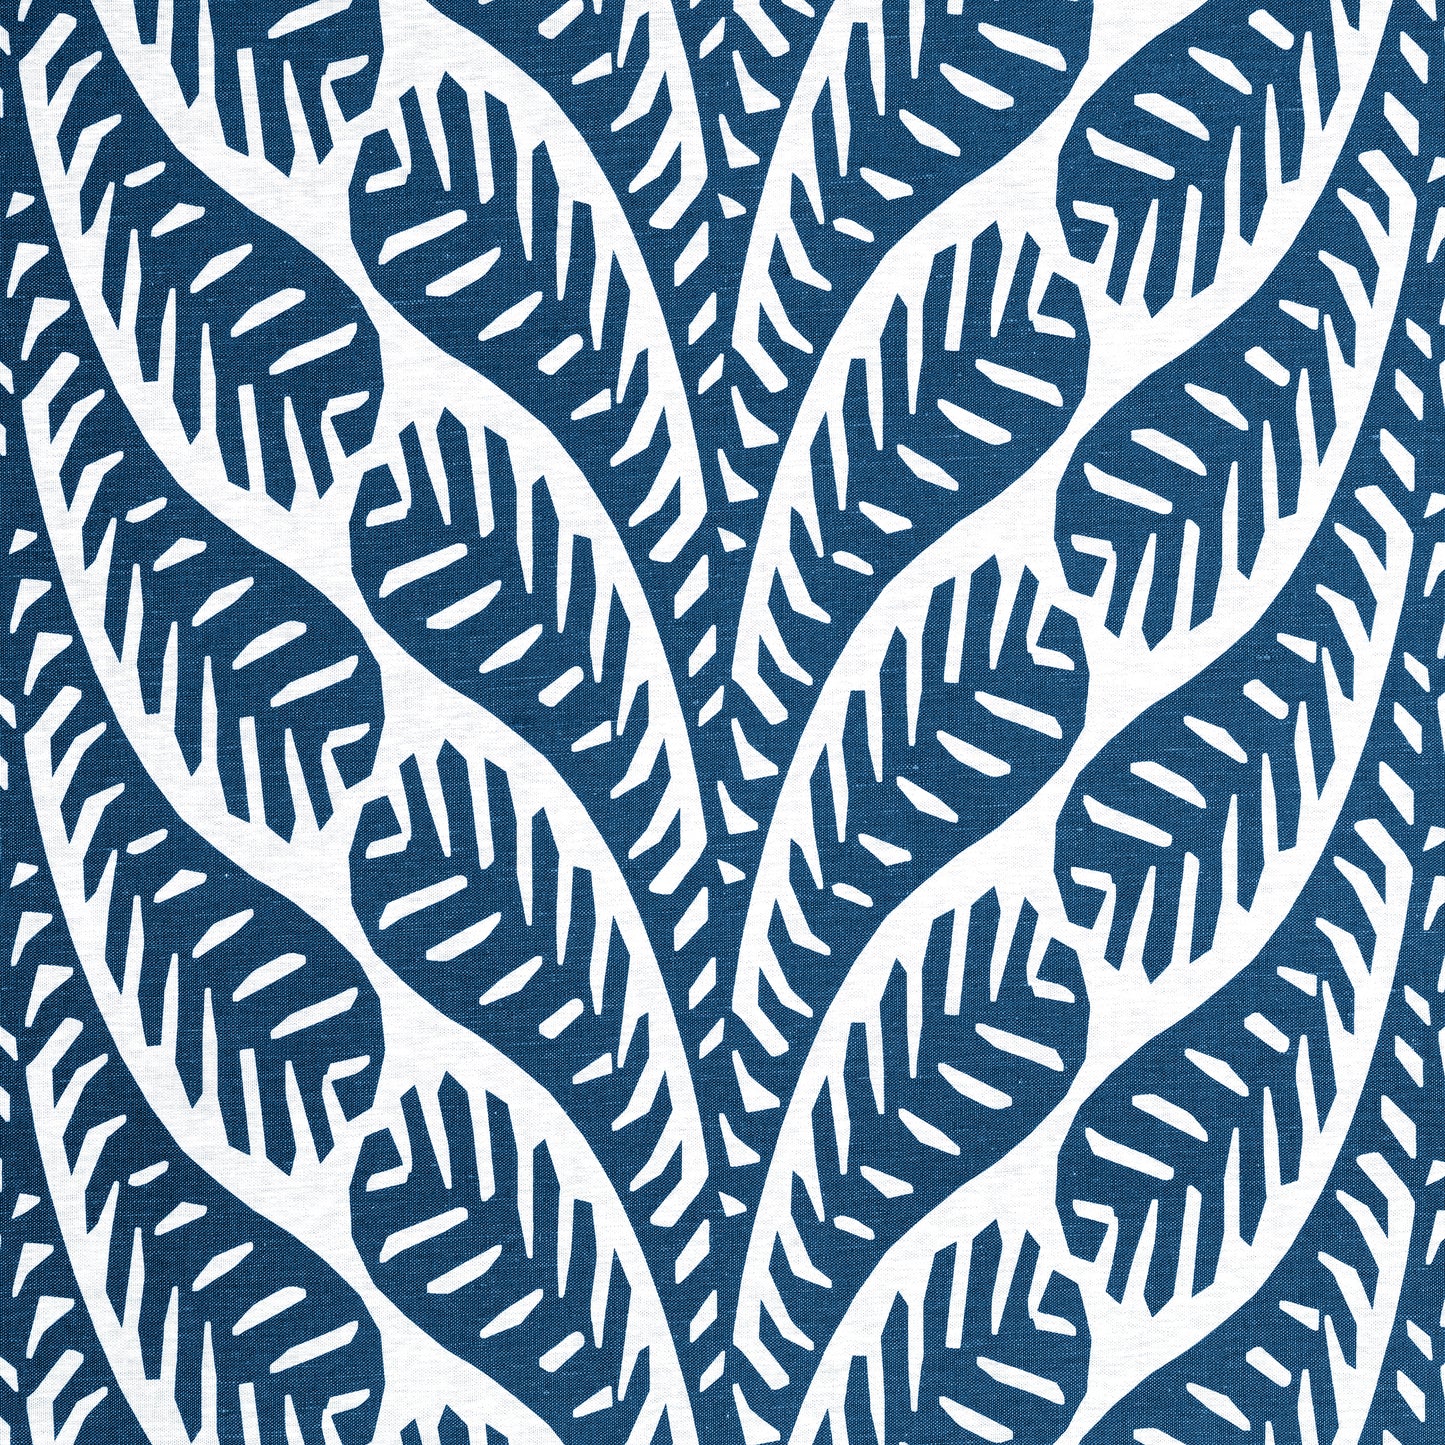 Purchase Thibaut Fabric SKU# F920827 pattern name Ginger color Navy